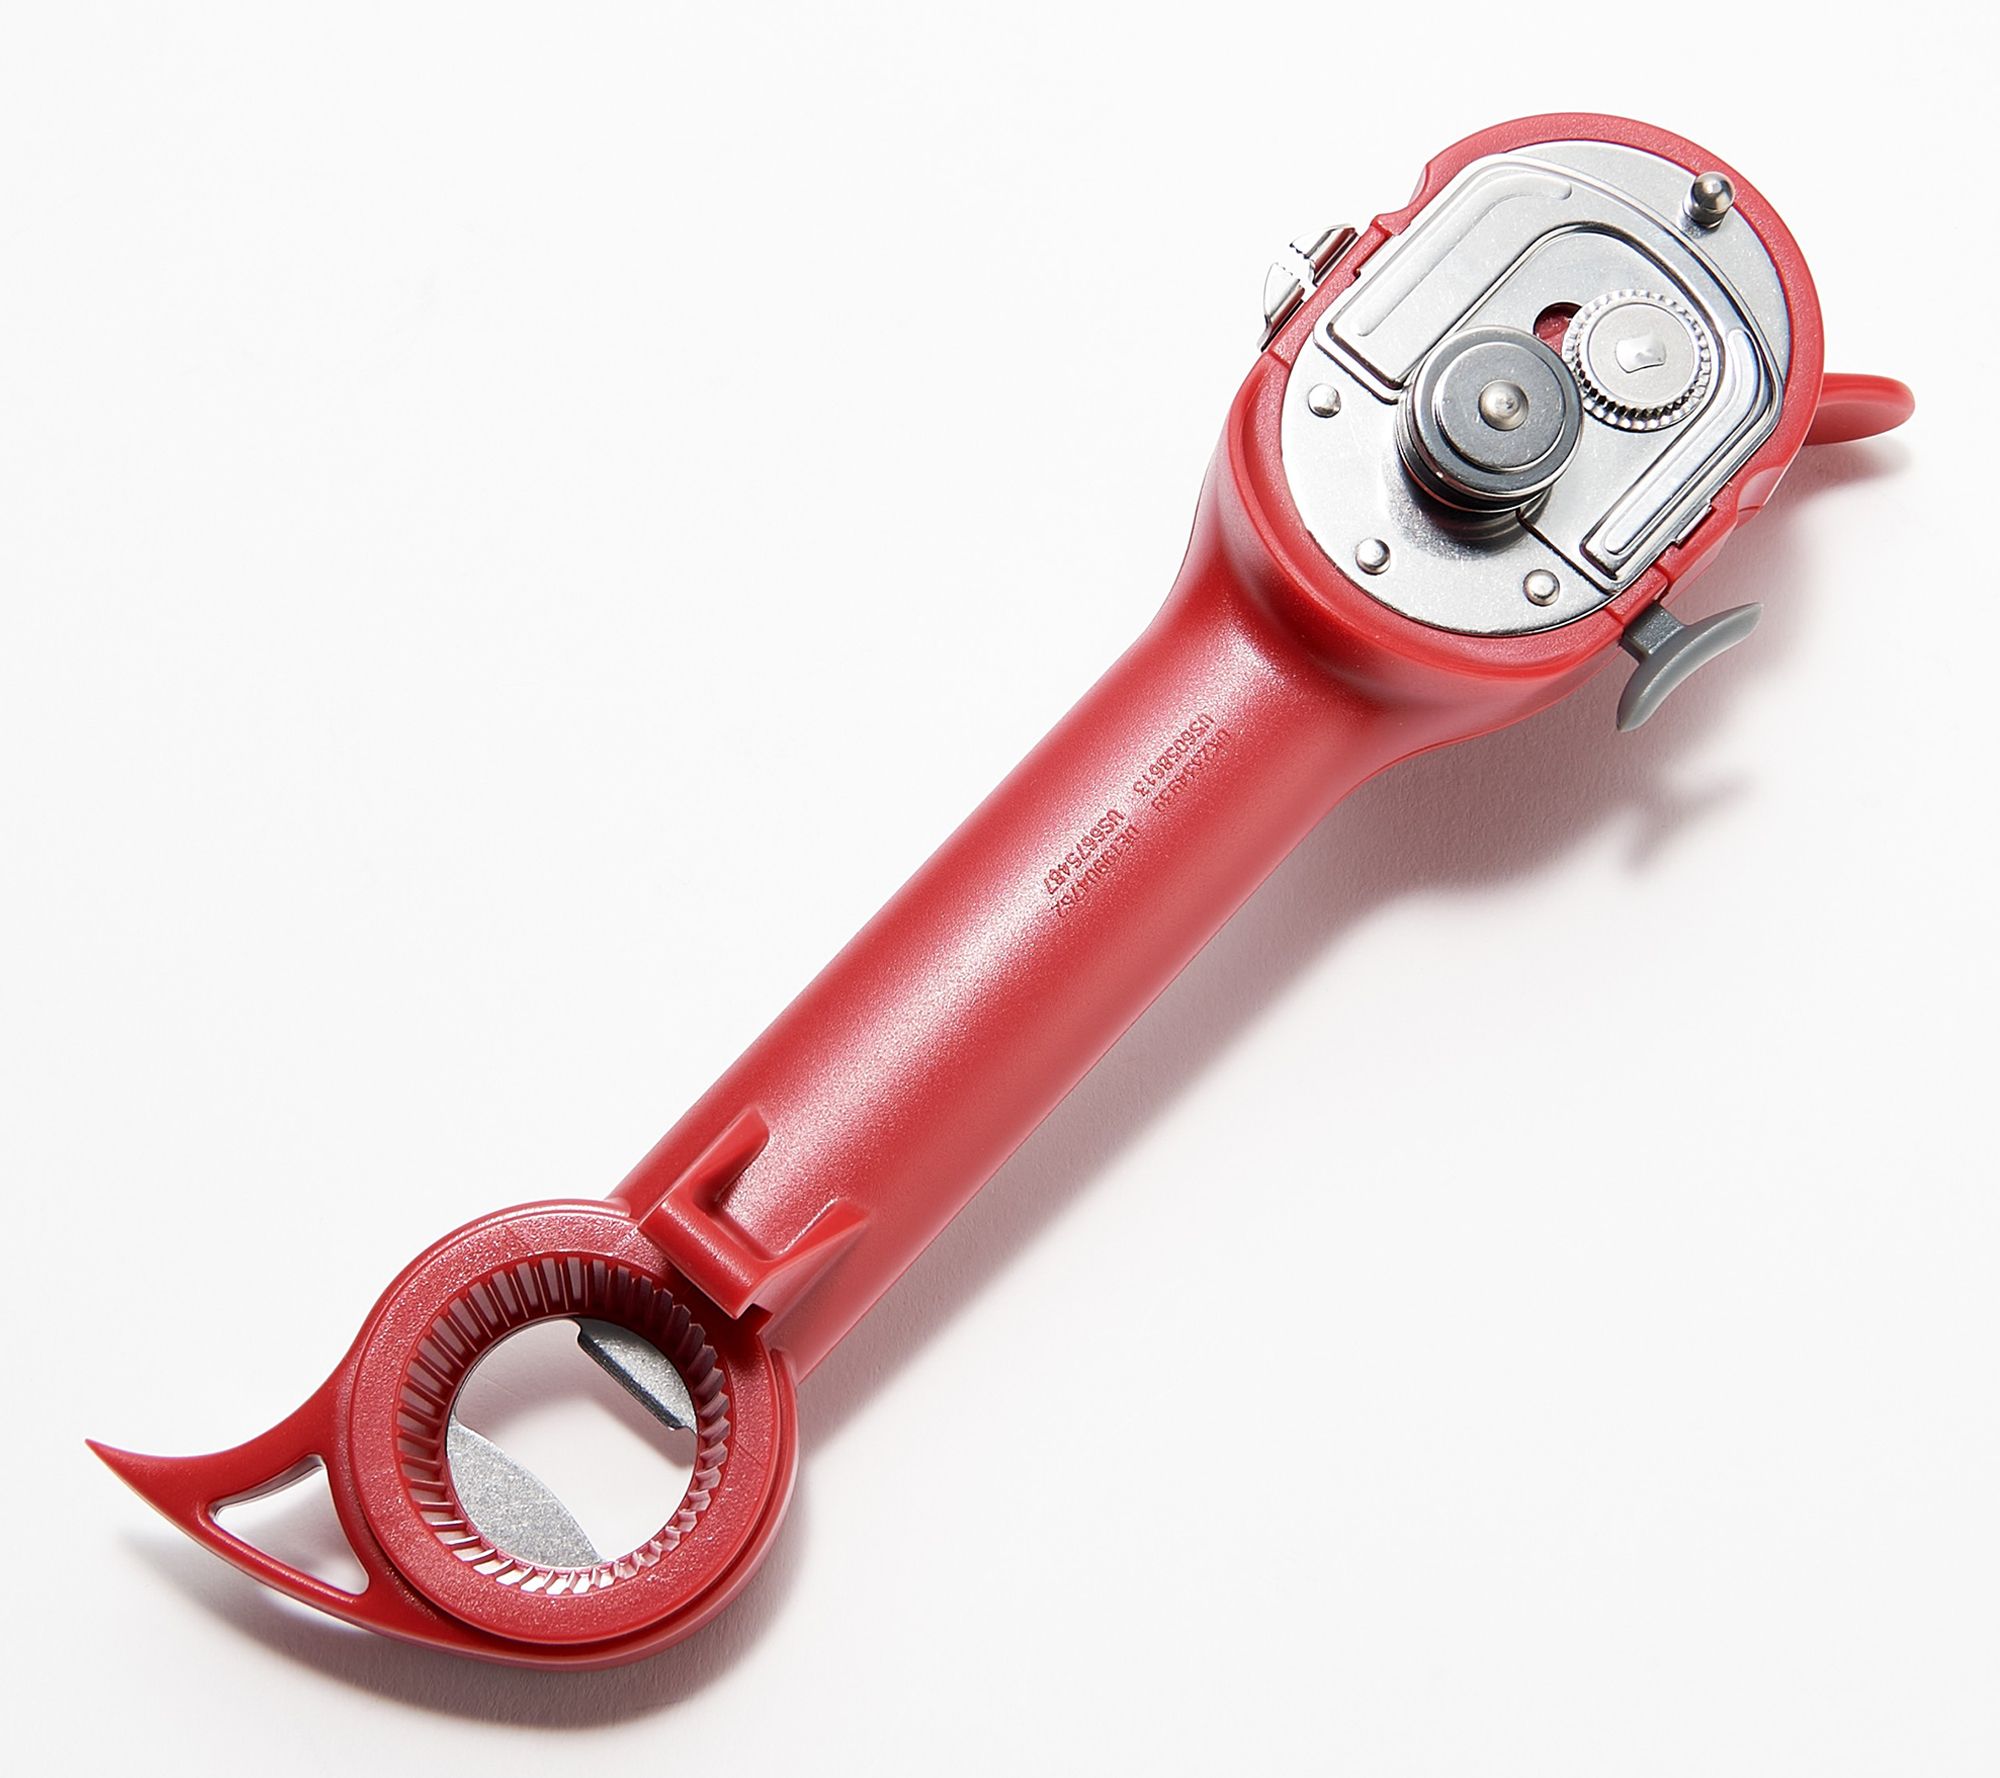 Kuhn Rikon 5-in-1 Master Auto Safety Can Opener